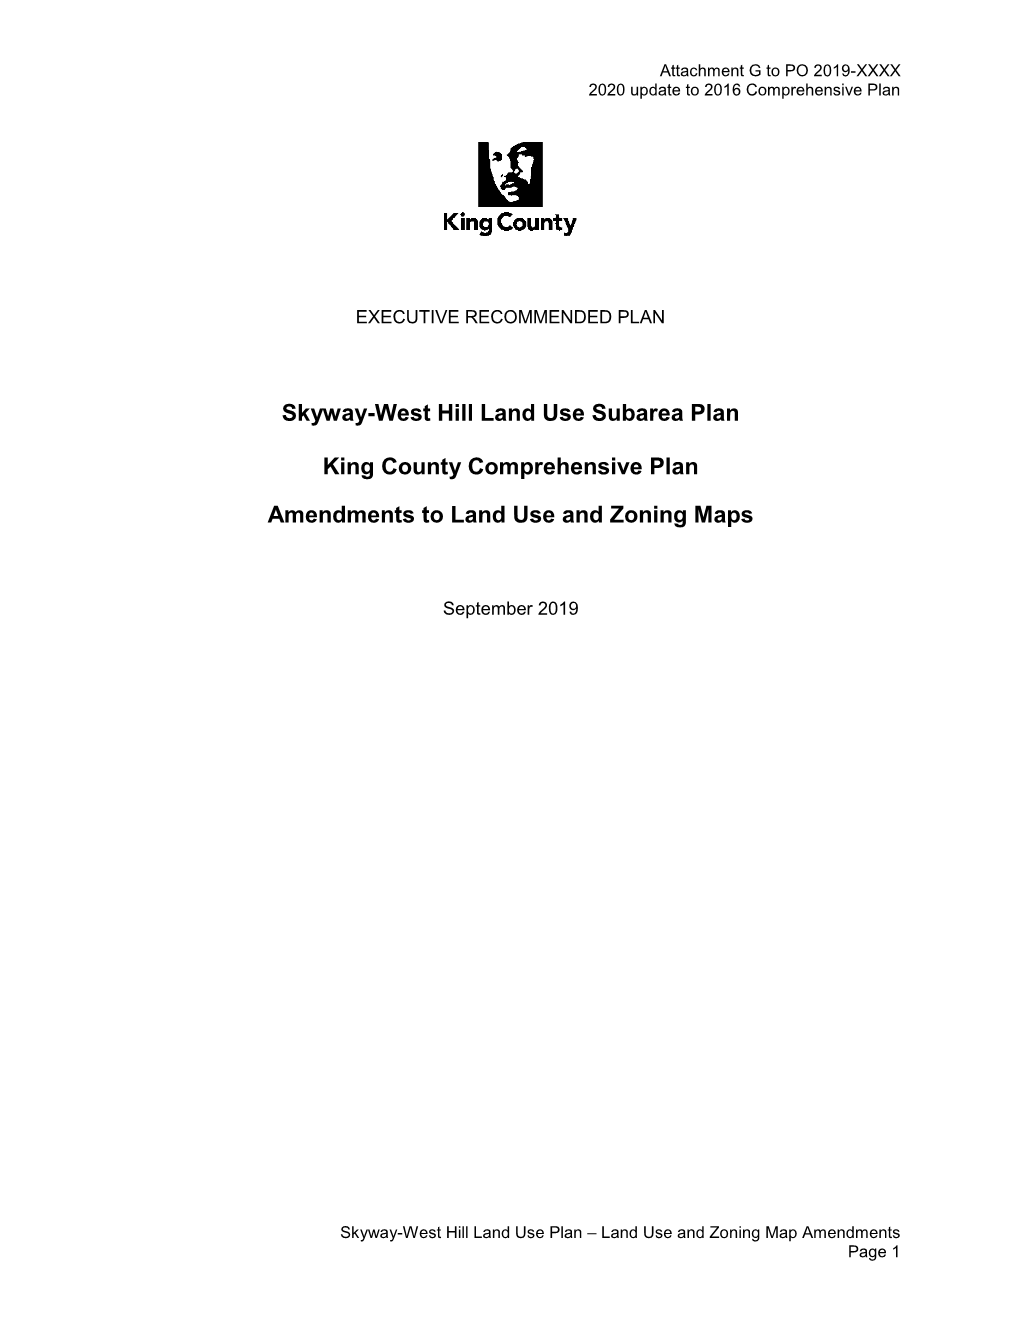 Skyway-West Hill Land Use Subarea Plan King County Comprehensive